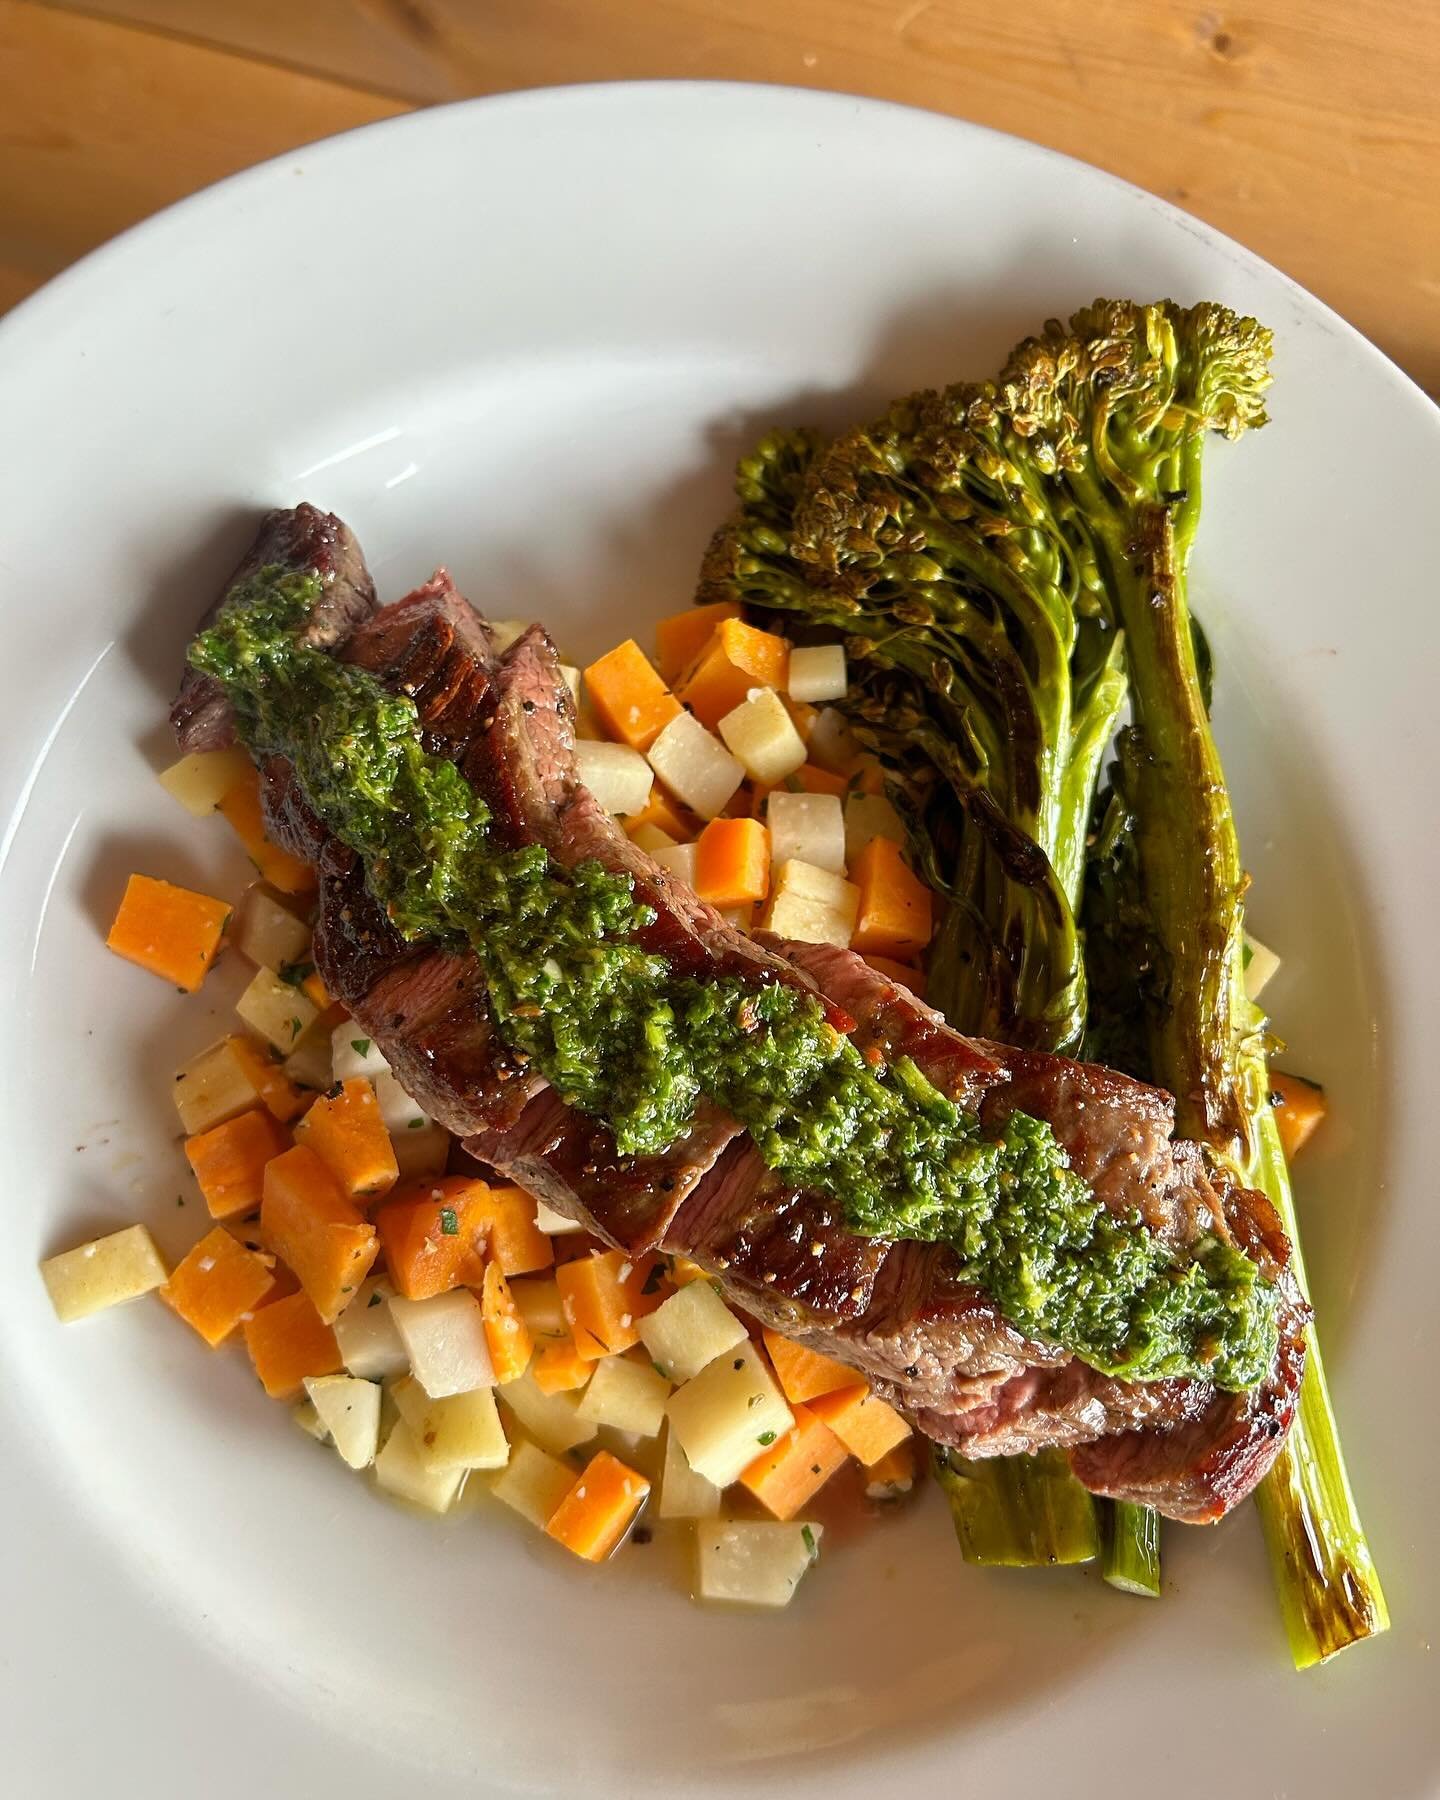 Kipling/Denver Kitchen Special - Chimichurri Steak! Juicy sliced flank steak over garlic-herb butter root veg hash with roasted broccolini &amp; Fresno pepper chimichurri sauce. 
Available nightly after 4pm at our Denver location at 4550 S Kipling Pk